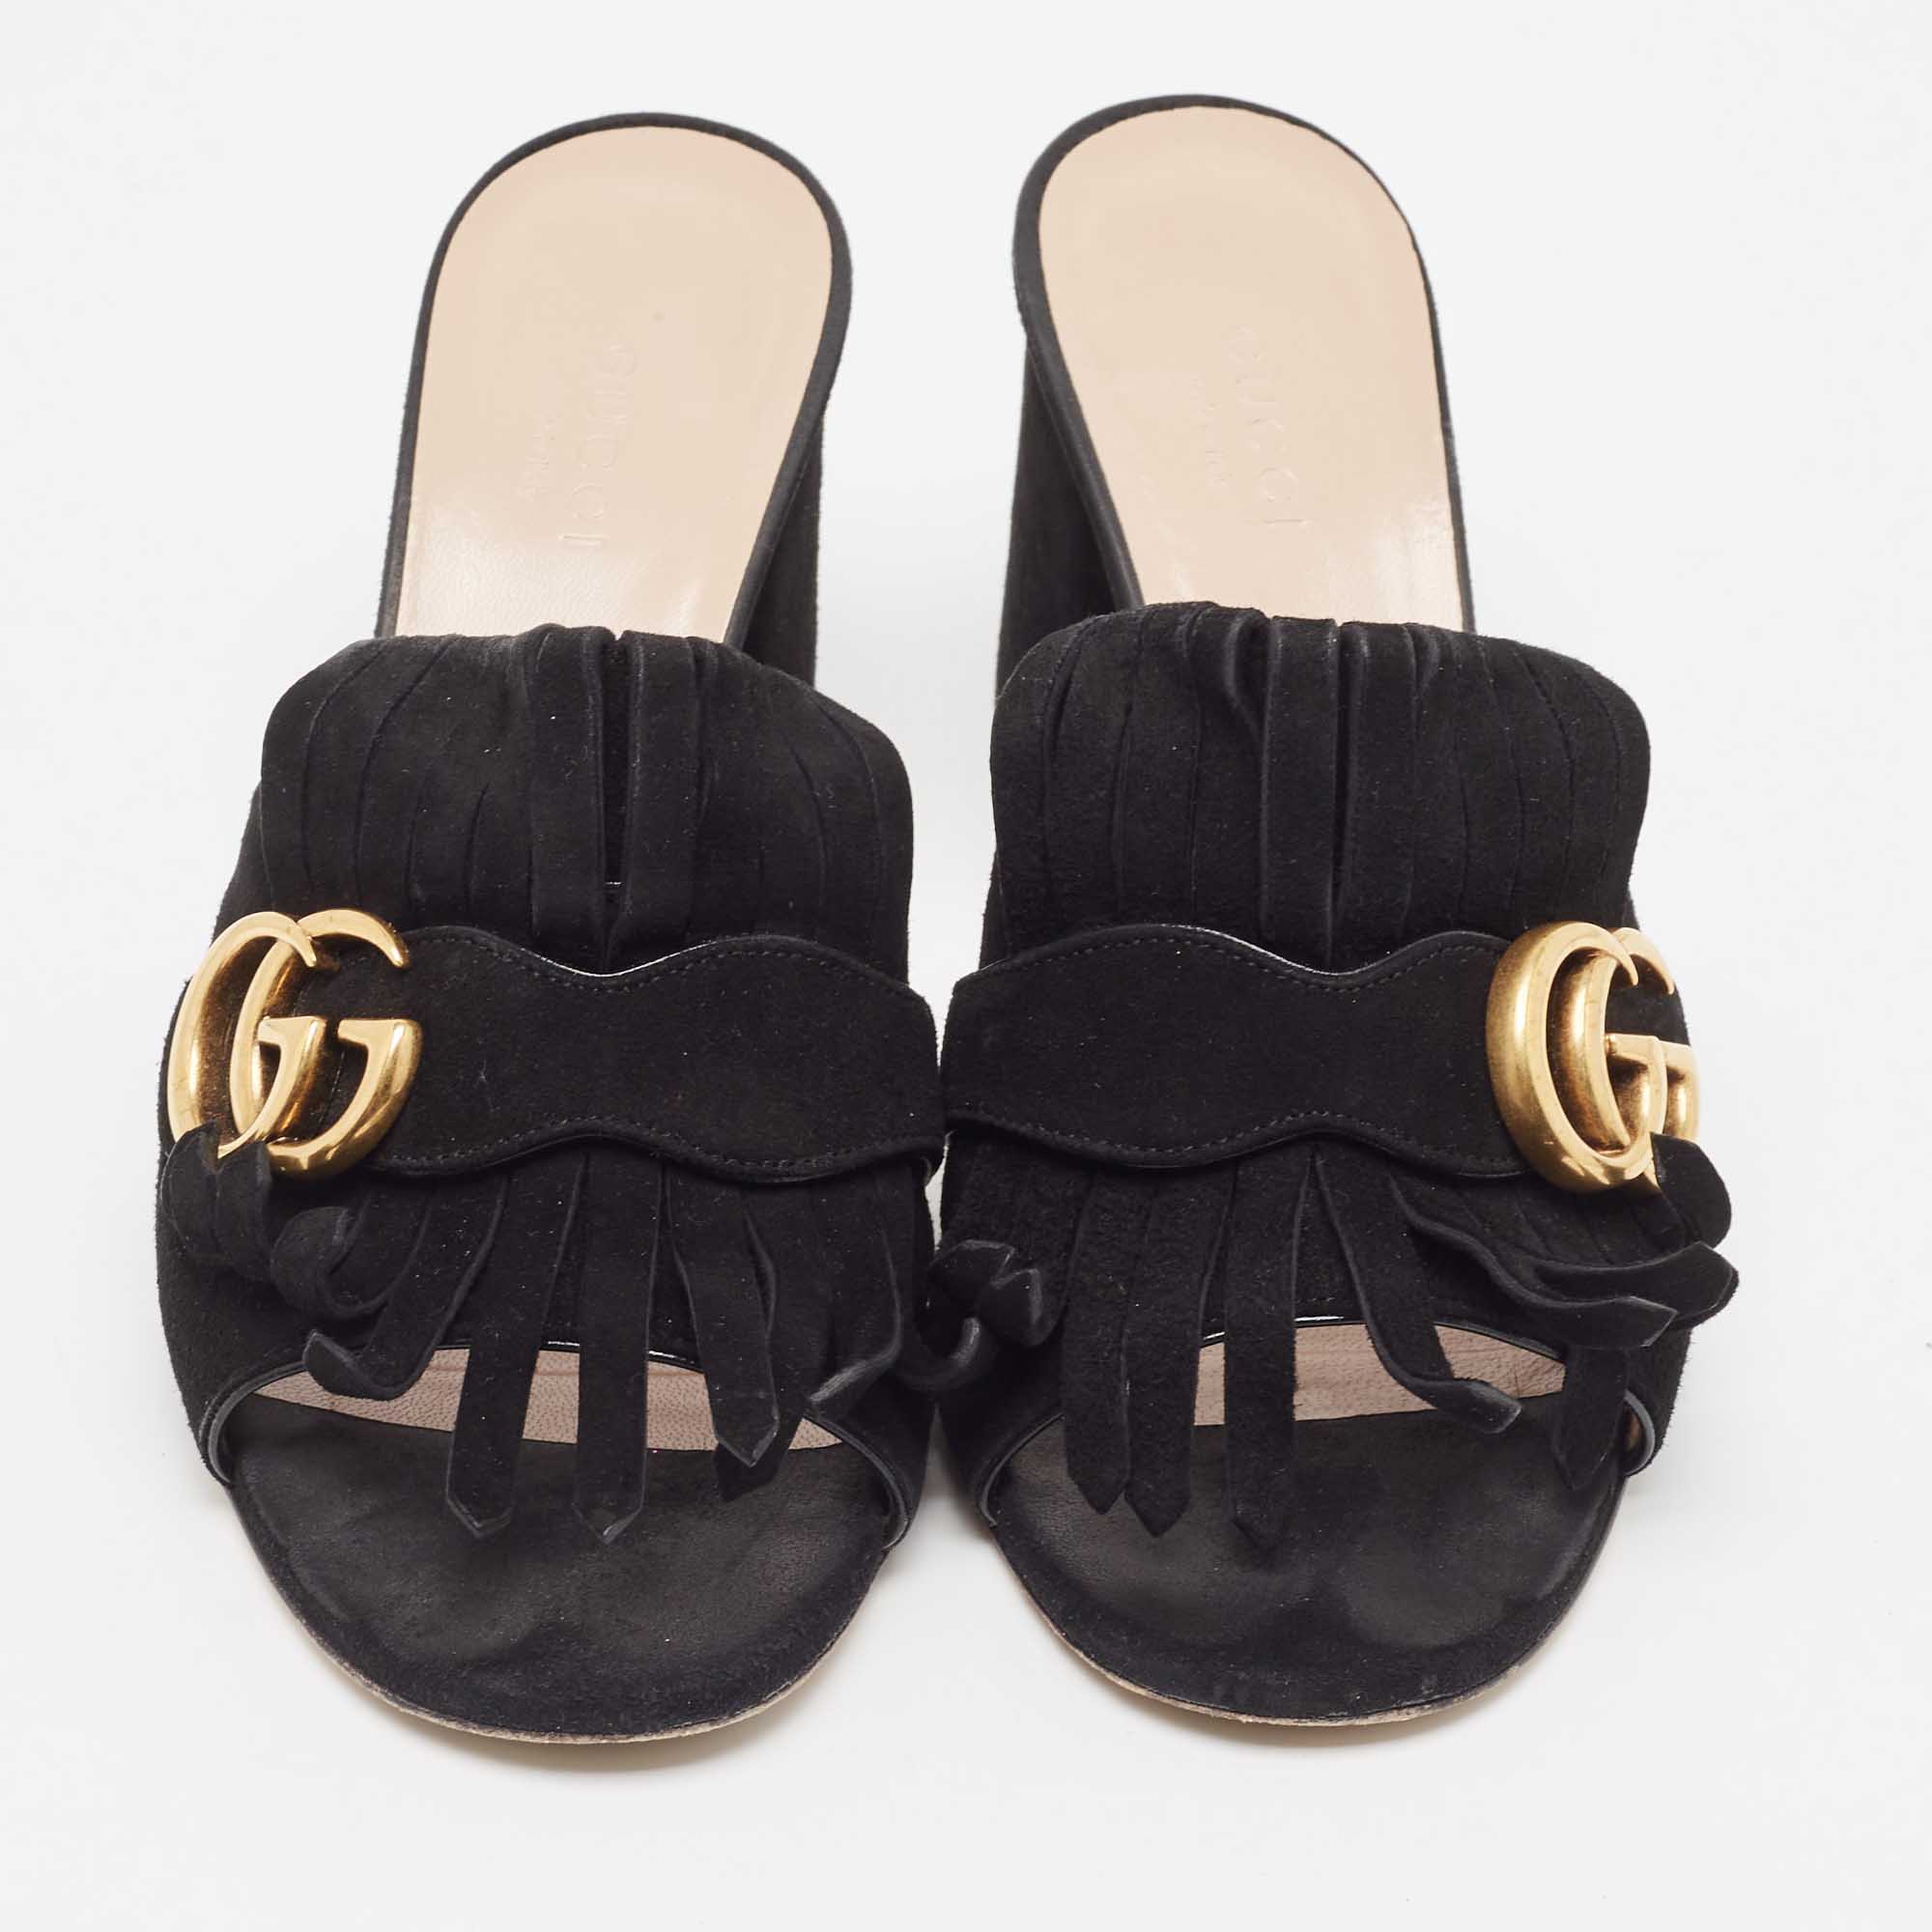 Gucci Black Suede GG Marmont Fringe Mules Size 37